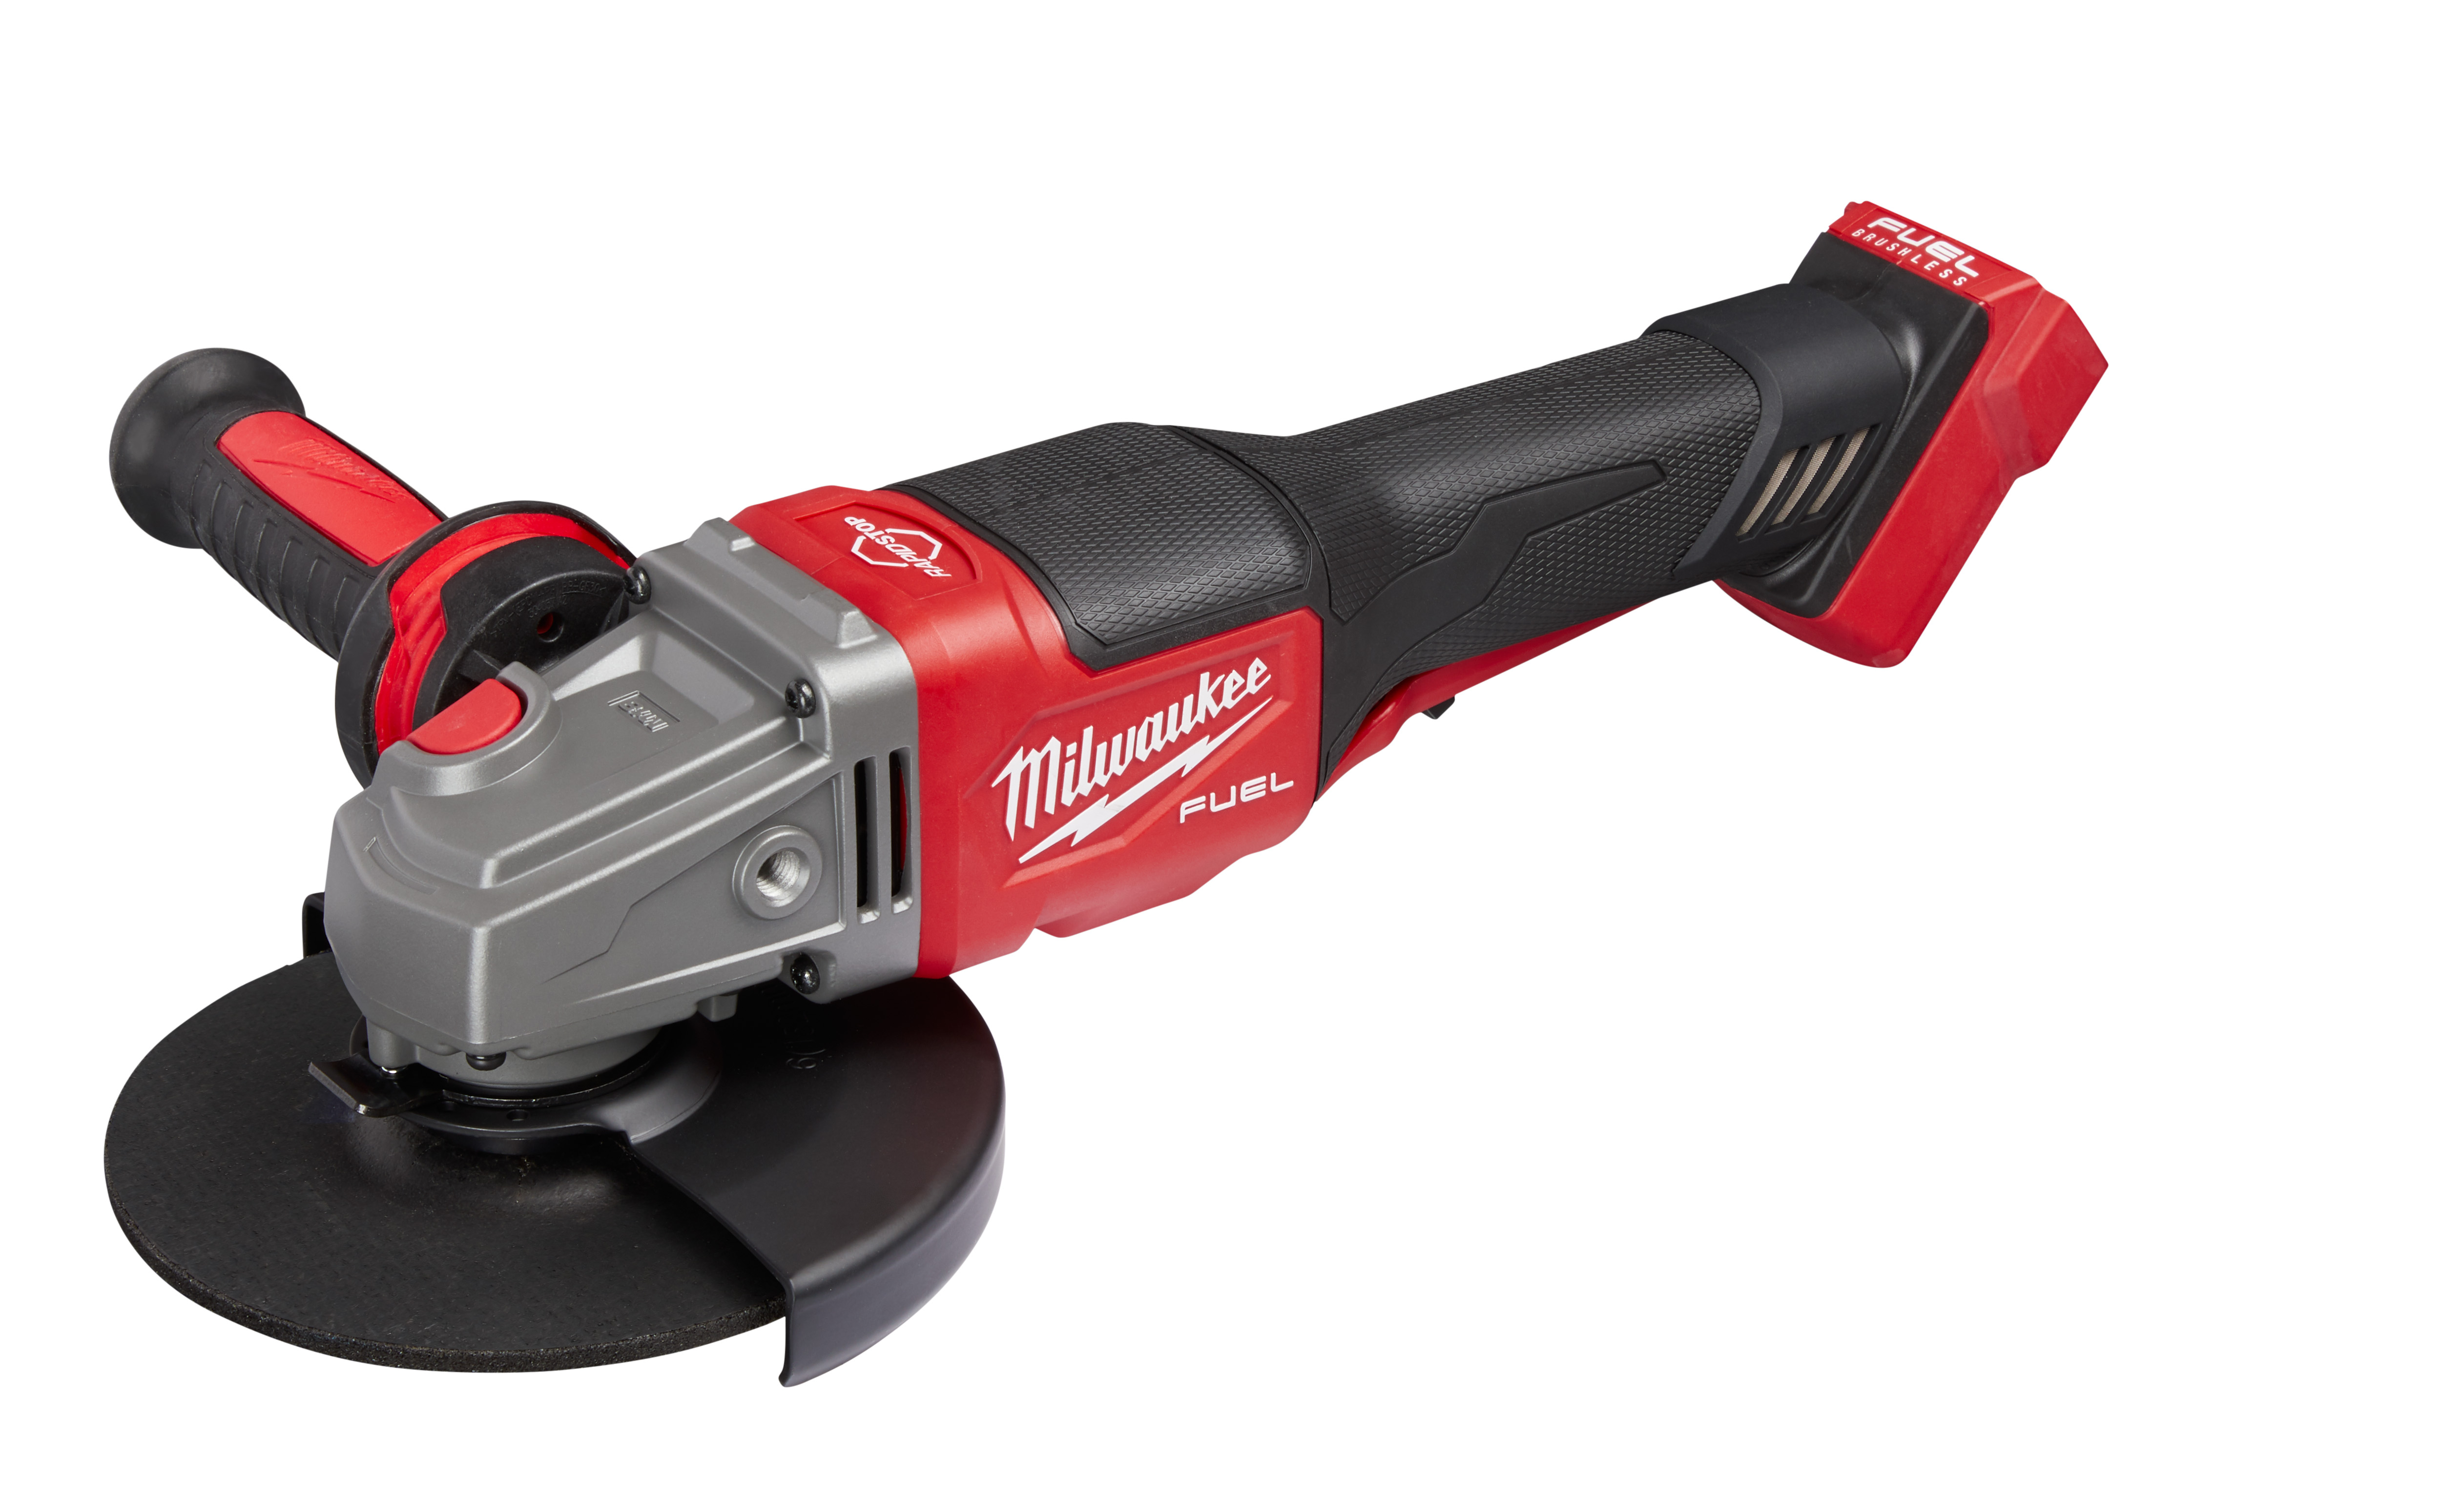 M18 FUEL™ 4-1/2 in.-6 in. No Lock Braking Grinder with Paddle Switch Image